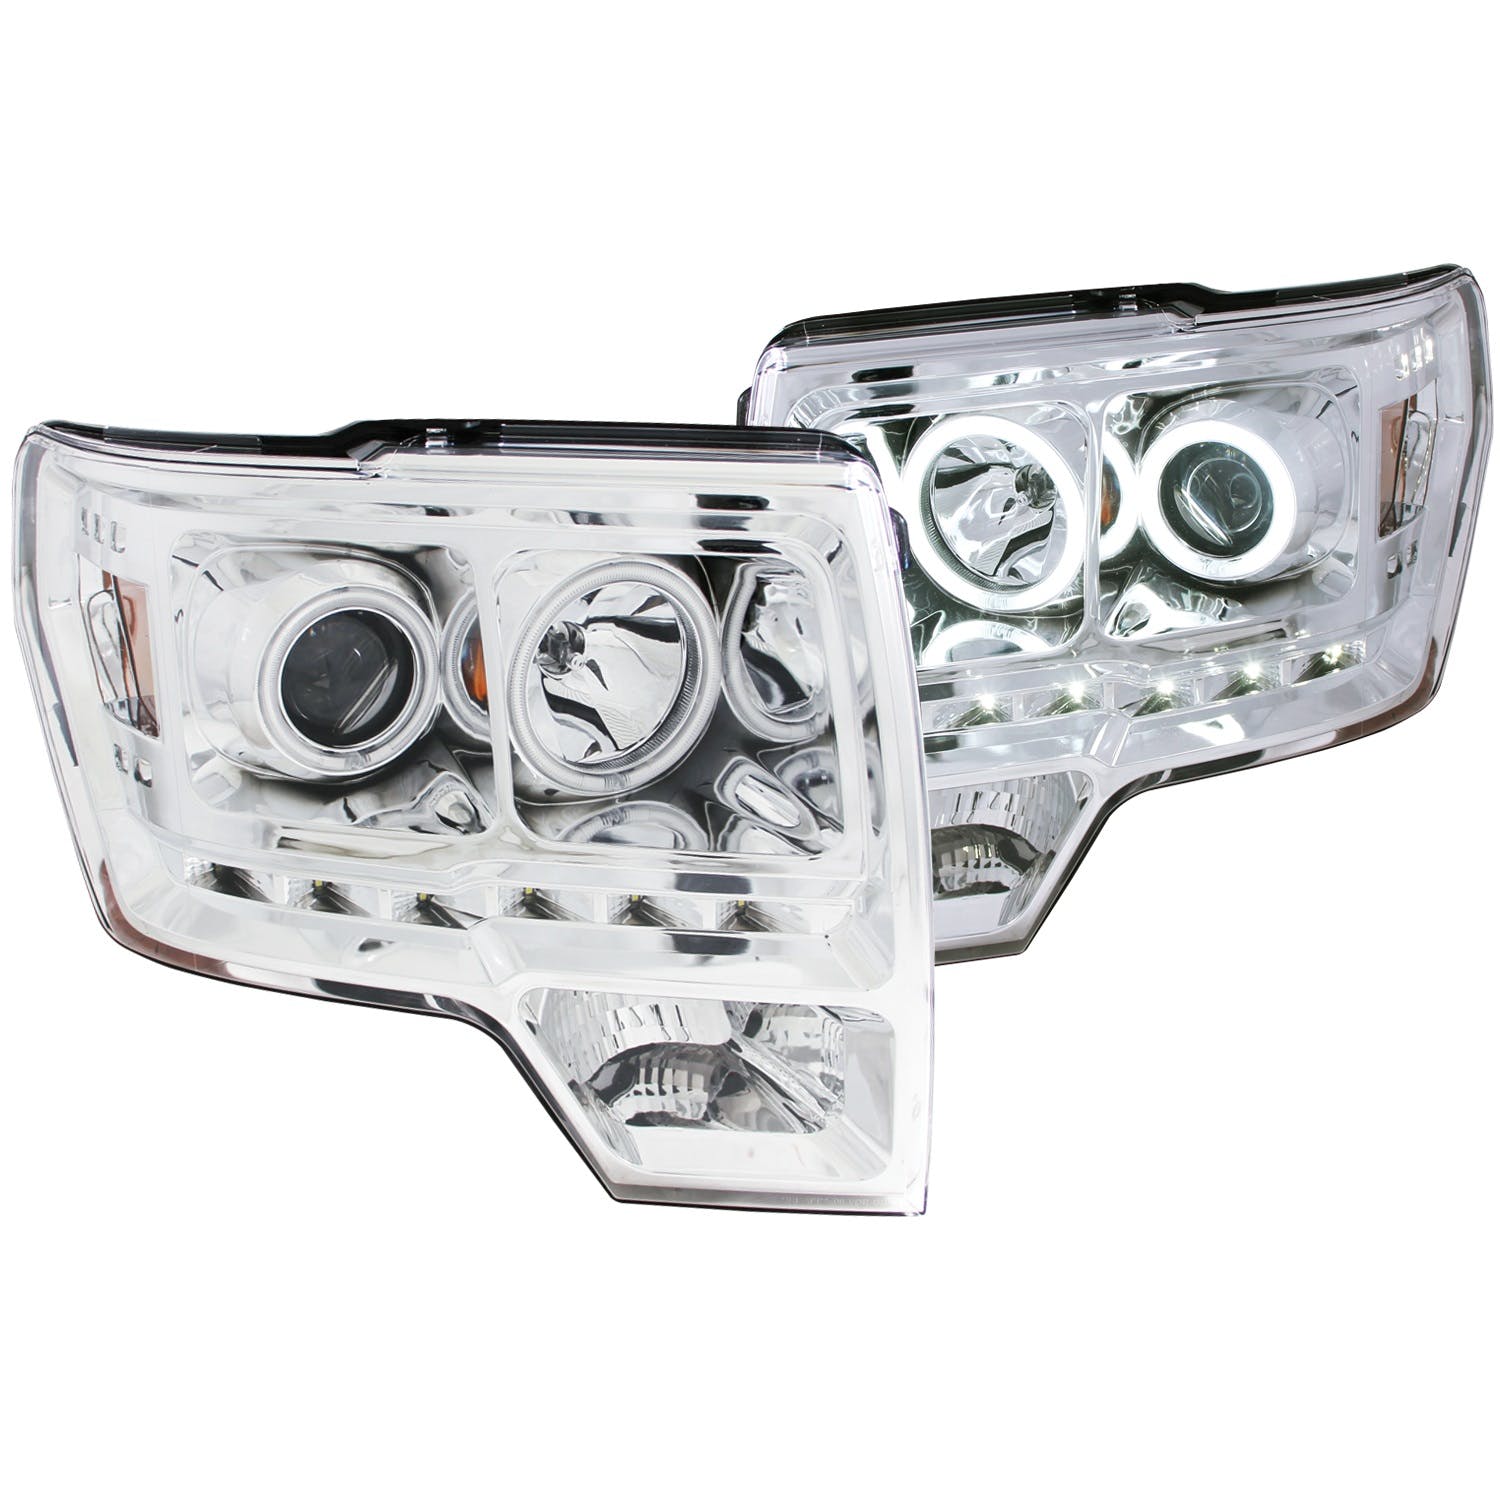 AnzoUSA 111297 Projector Headlights with Halo Chrome (SMD LED) G2